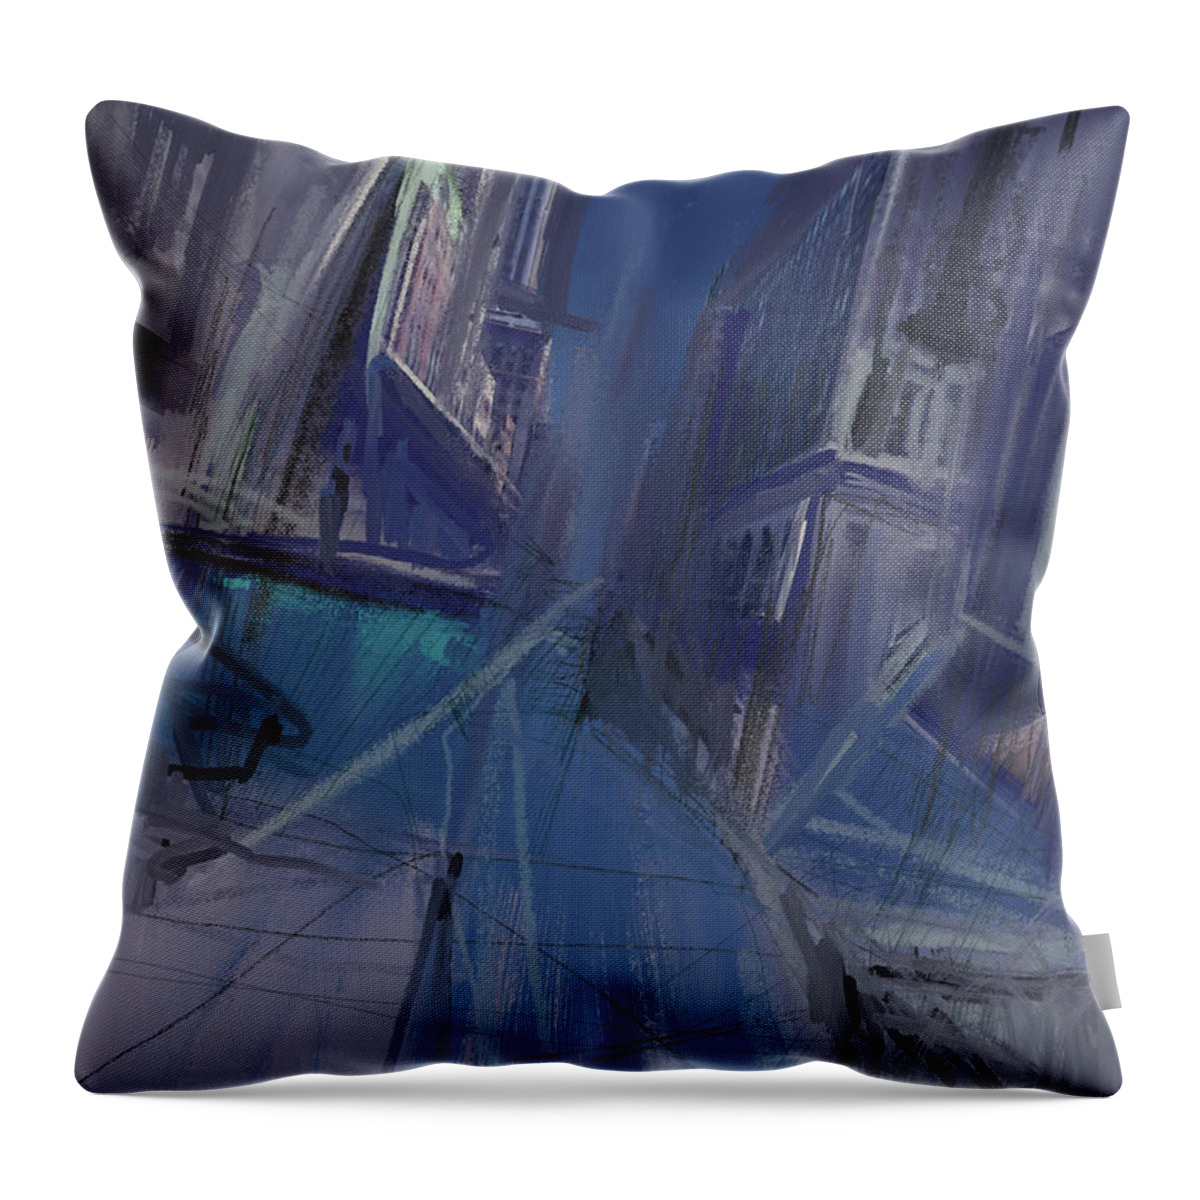 Cityscape Throw Pillow featuring the mixed media Night City by Russell Pierce